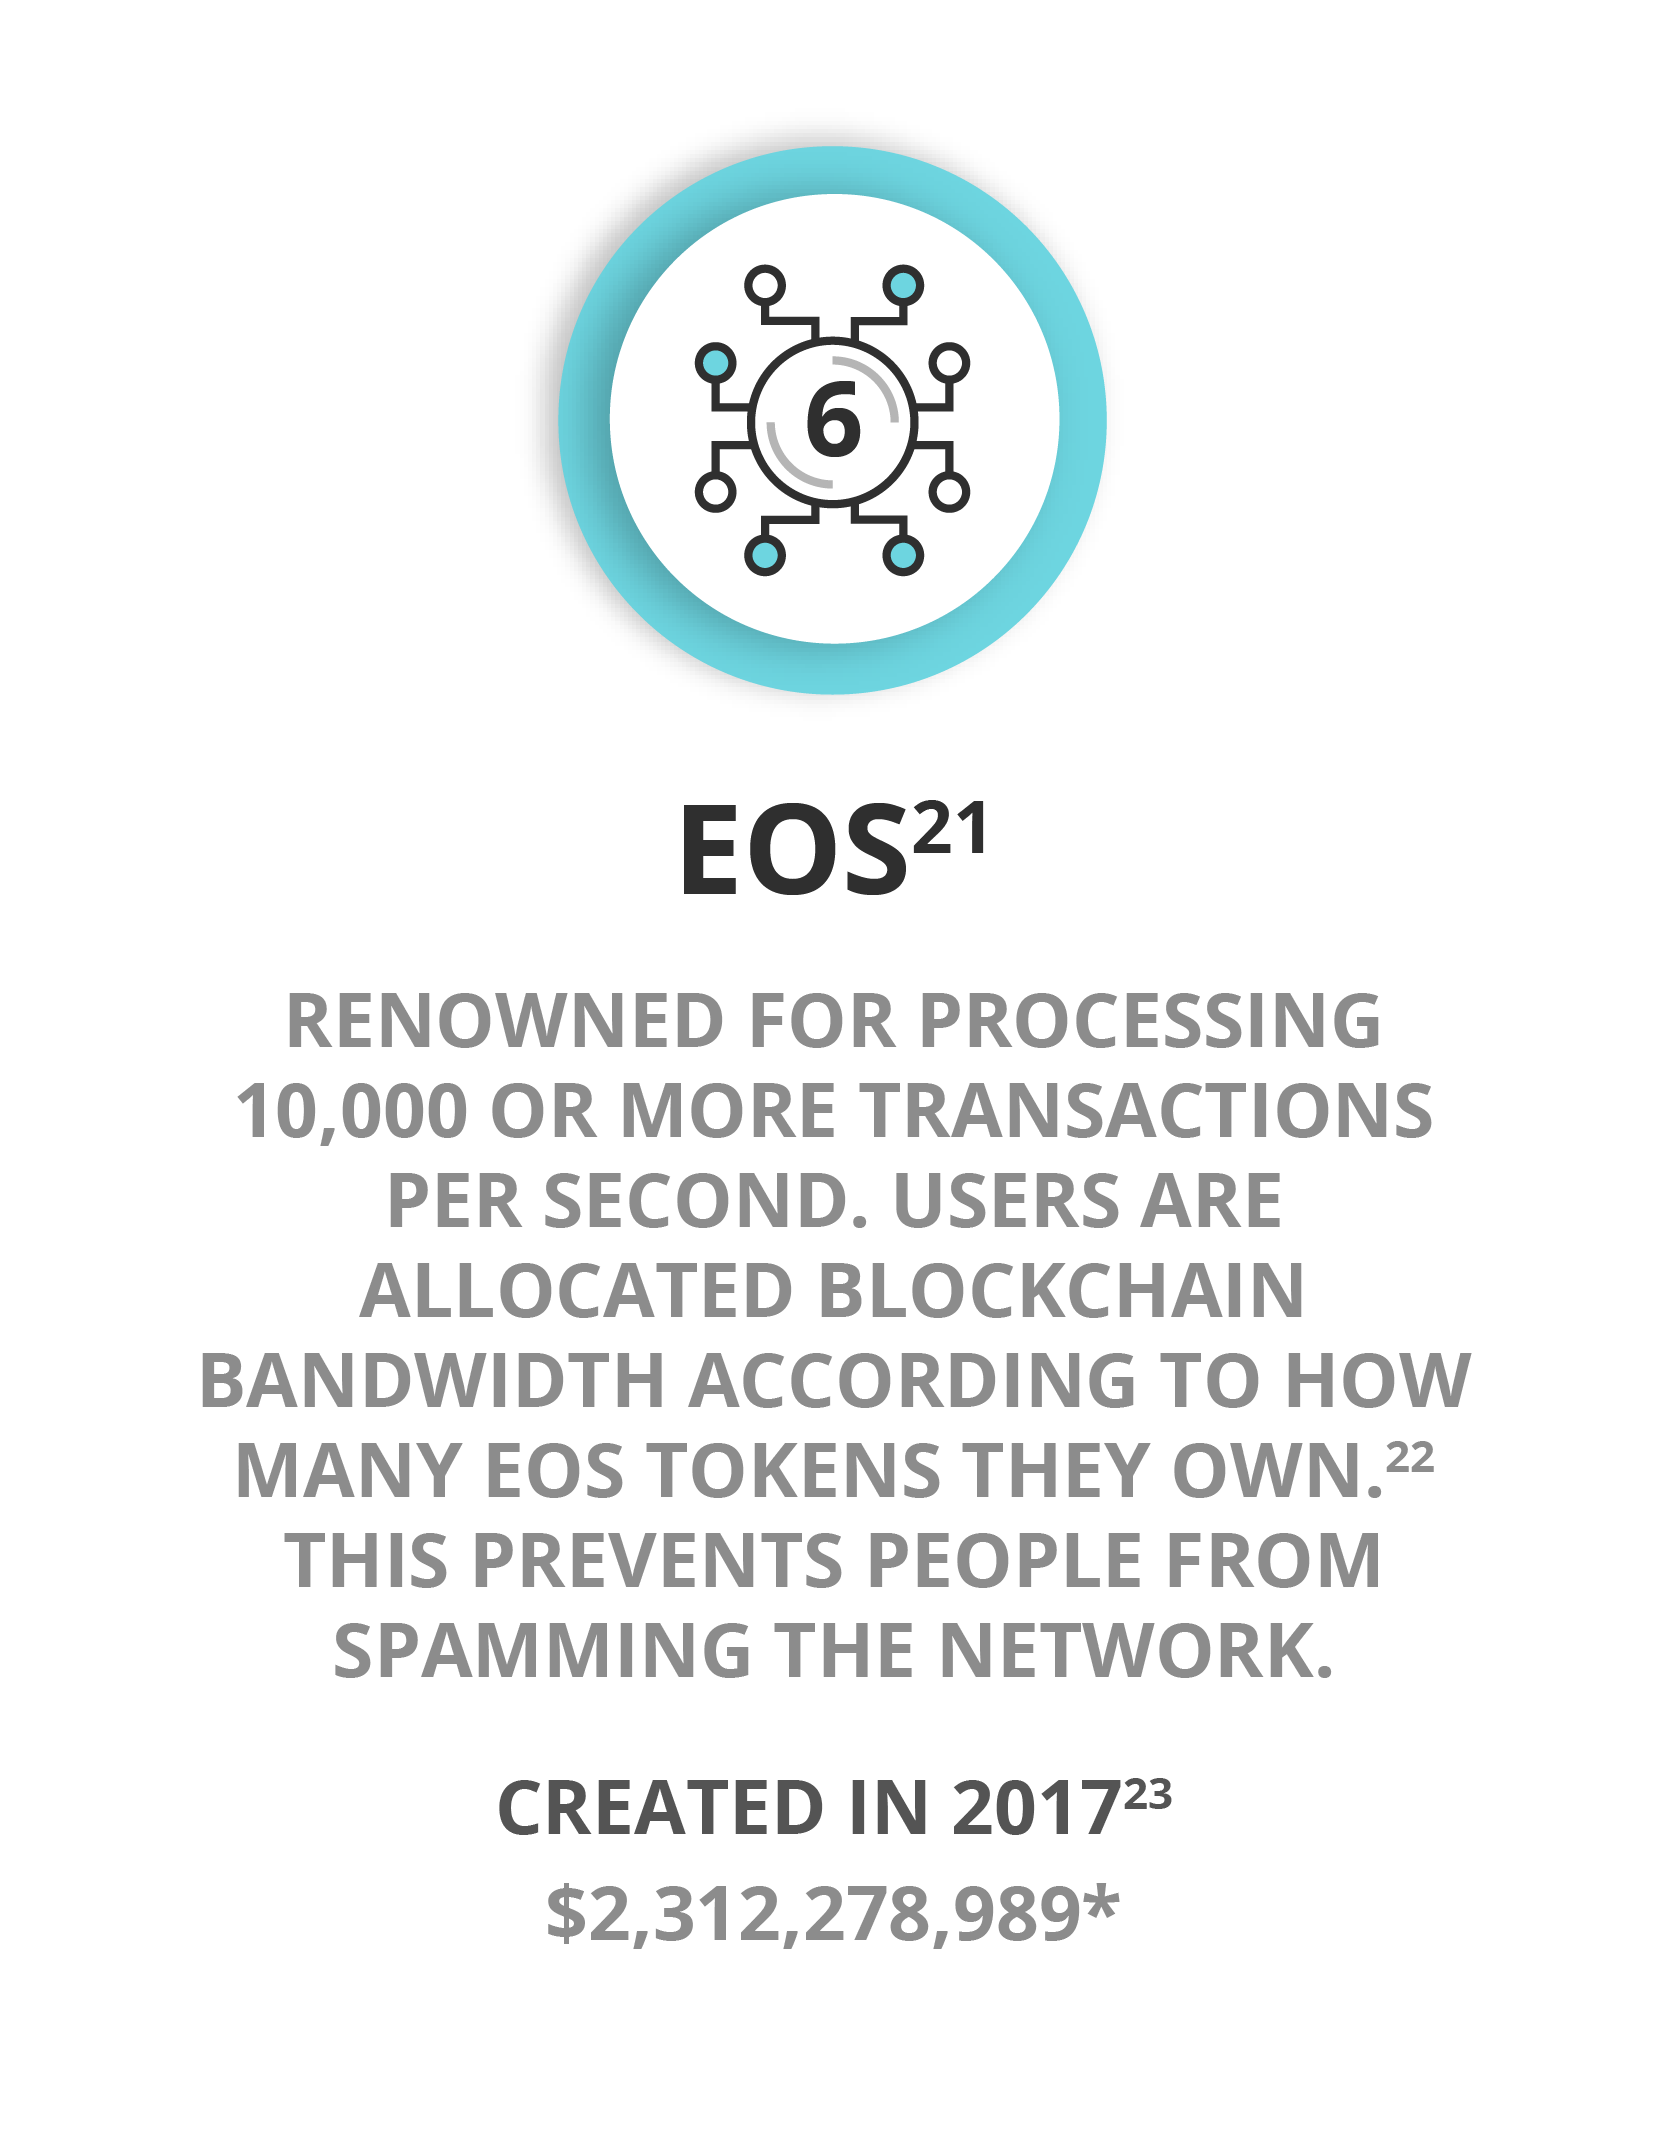 EOS - Renowned for processing 10000 or more transactions per second